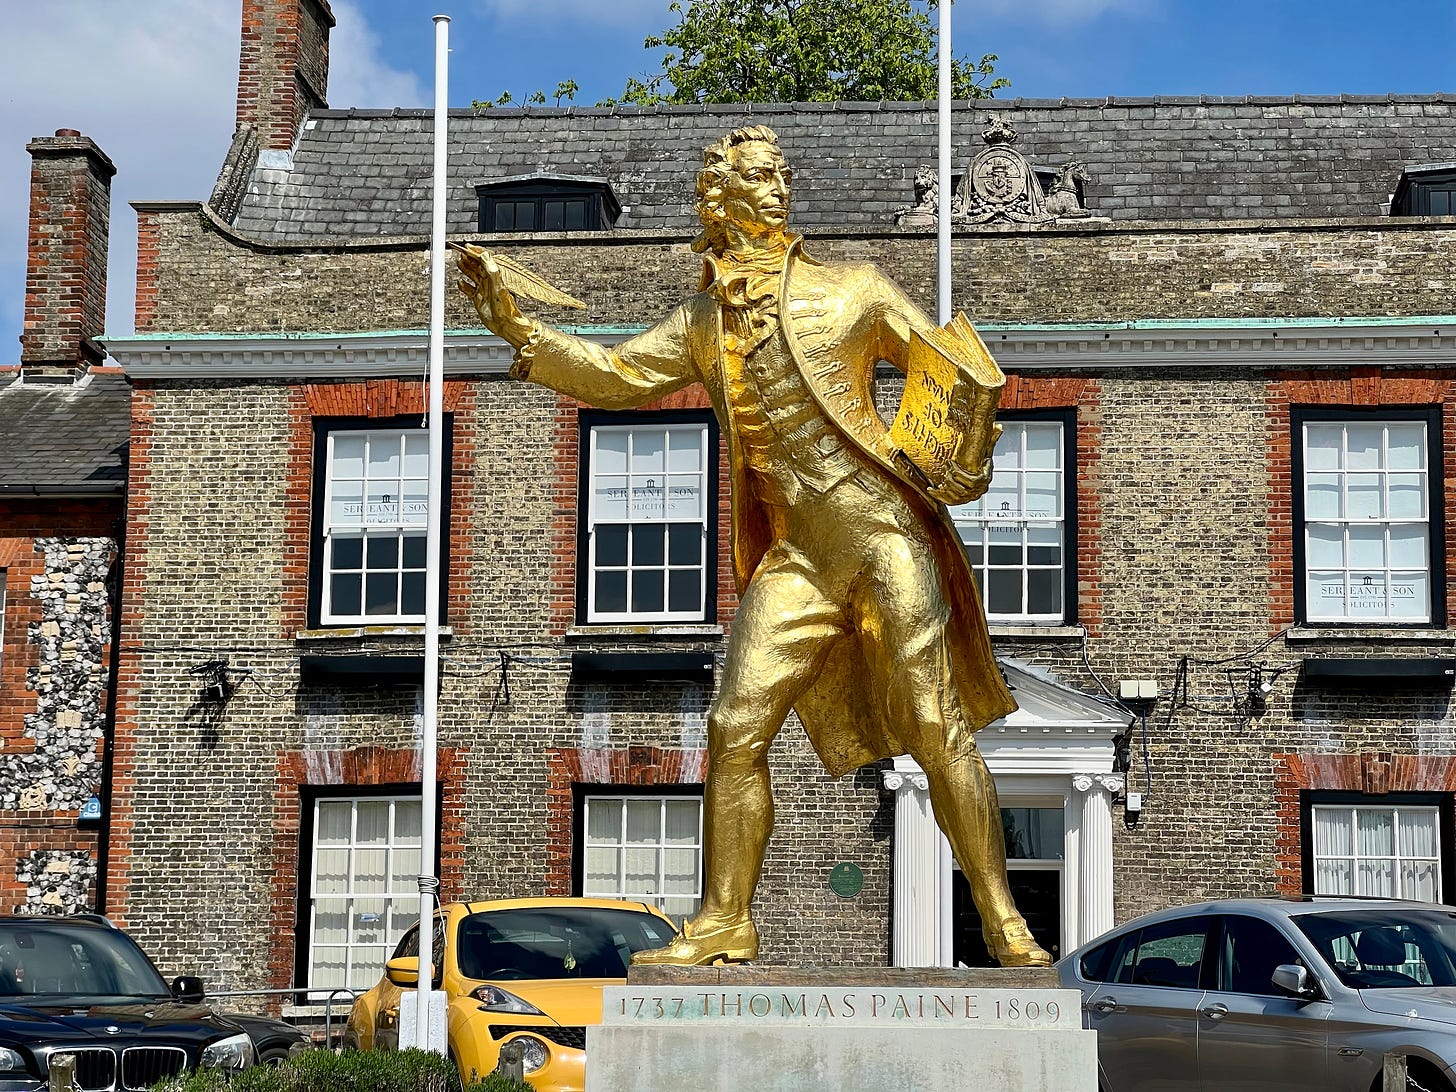 A golden statue of Tom Paine photographed in his birthplace of Thetford.